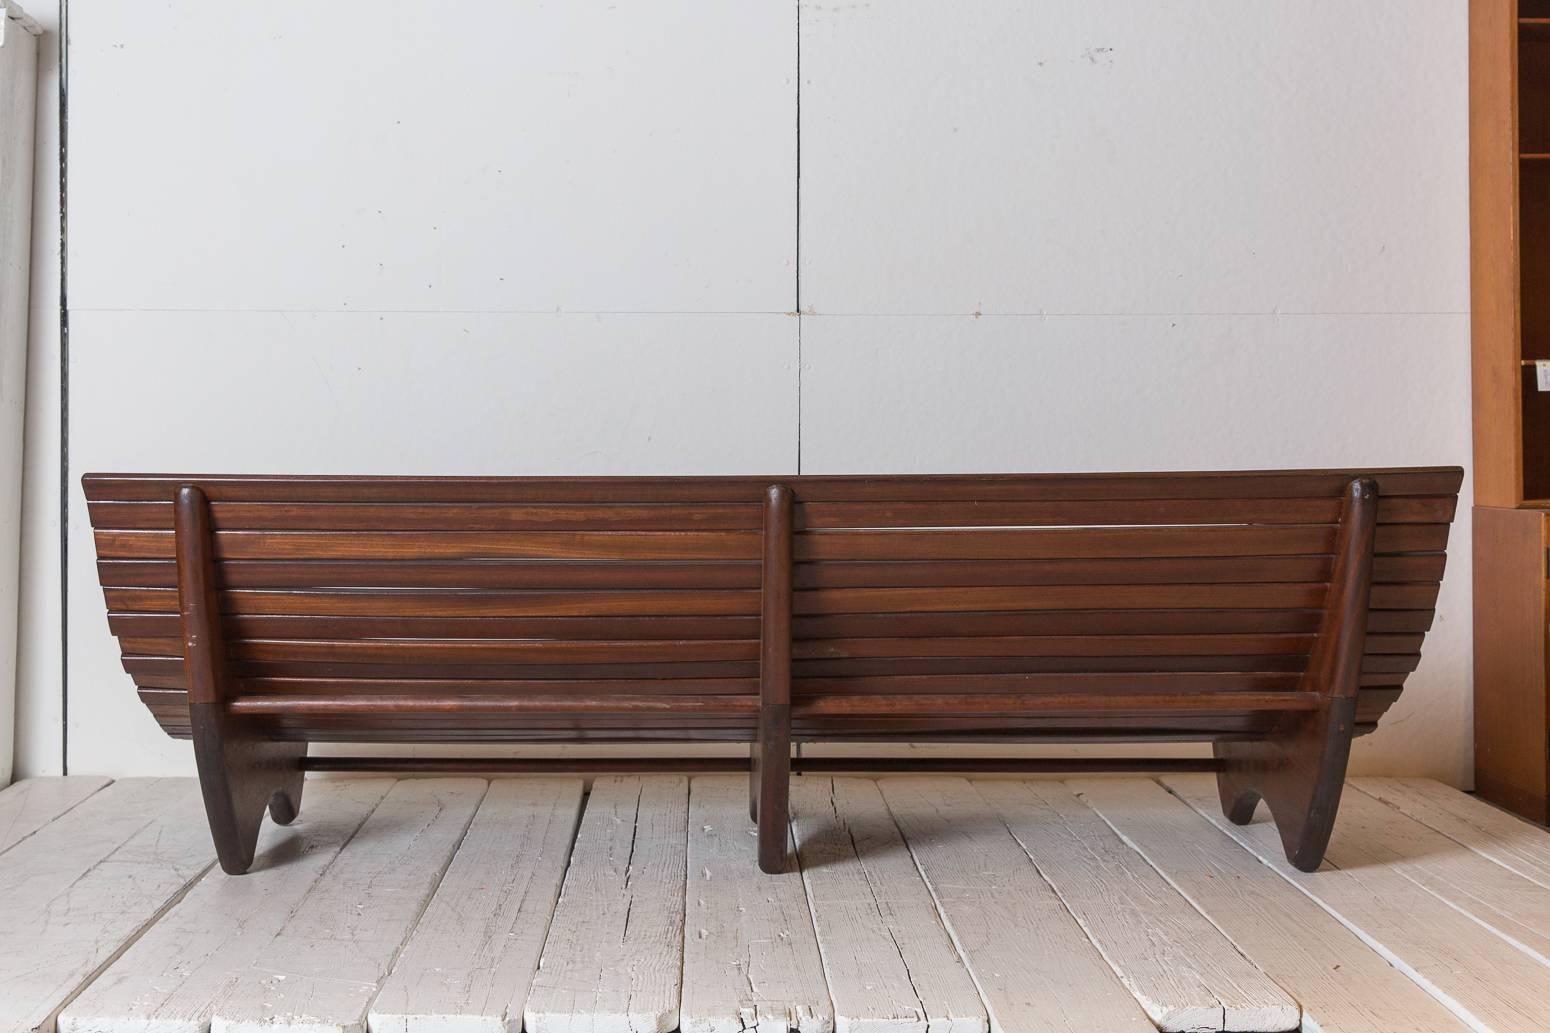 Wood Stained Brazilian Curved Slatted Bench with Three Legs 1